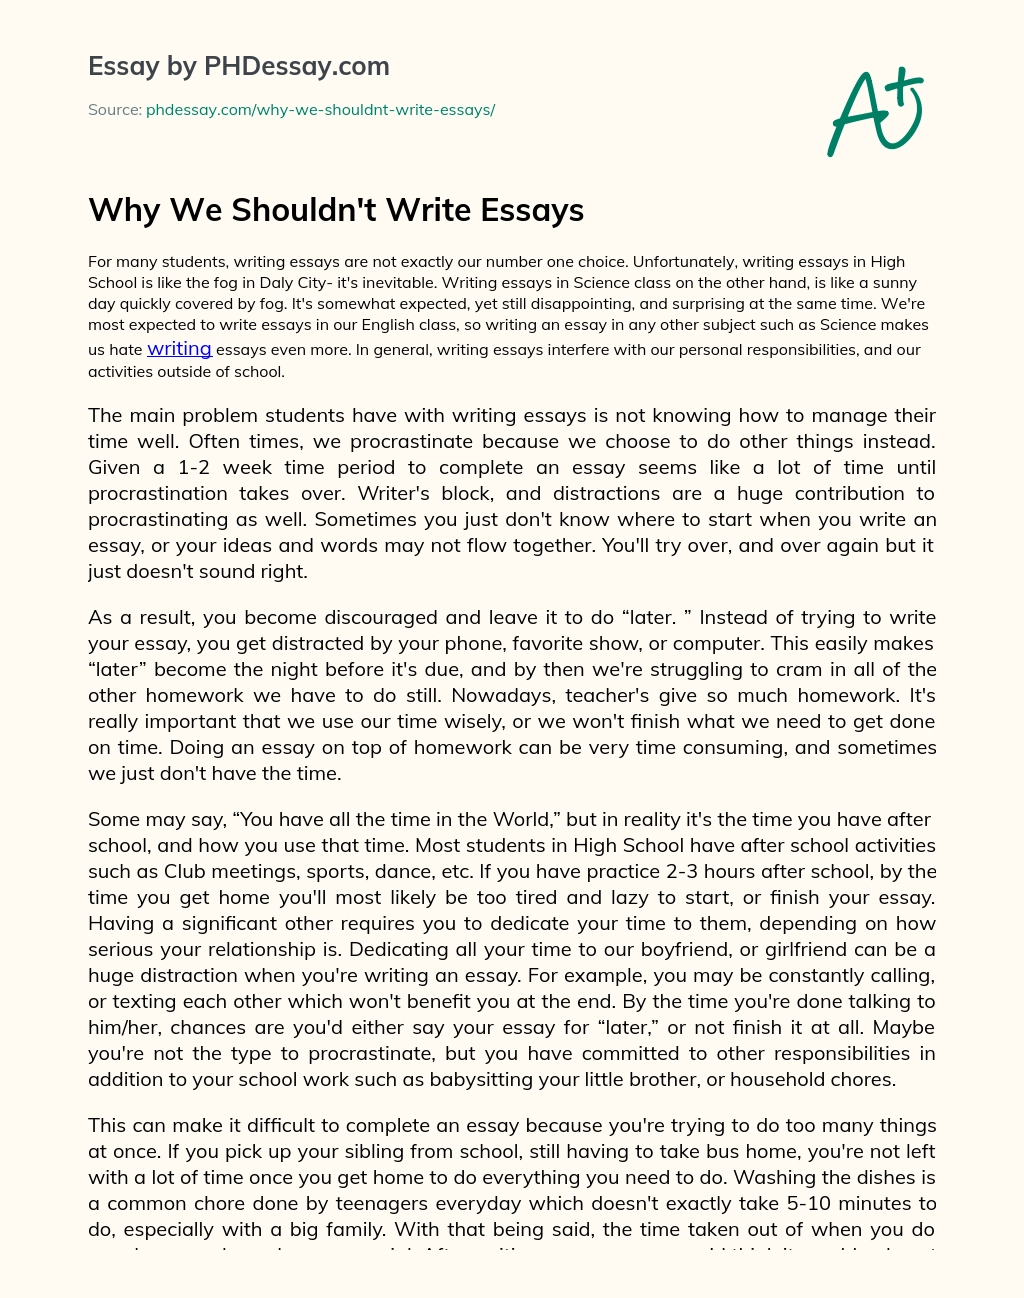 How to Write an Essay in Under 30 Minutes: 10 Steps